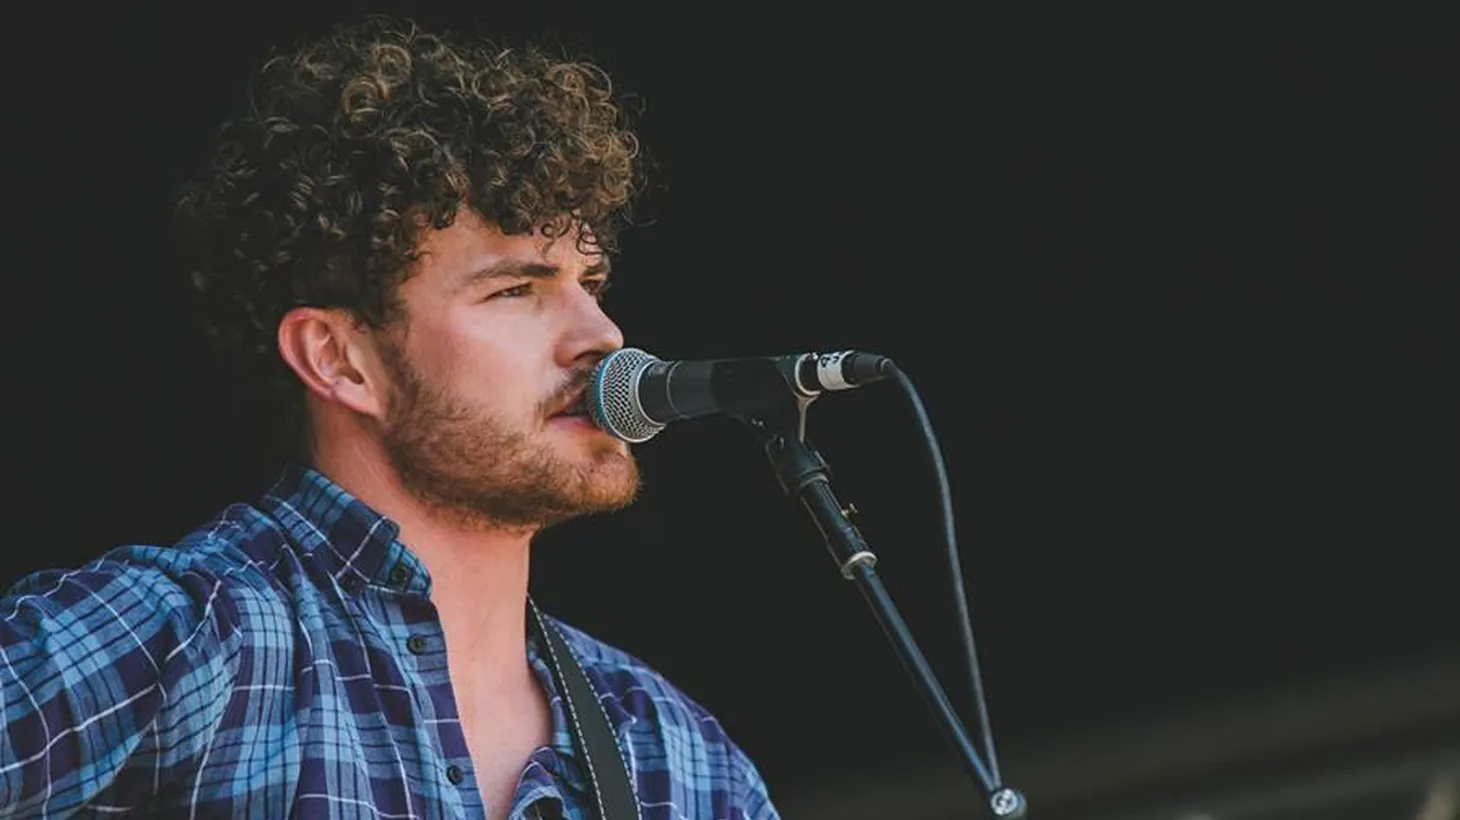 Aussie singer-songwriter Vance Joy has a knack for catchy melodies.